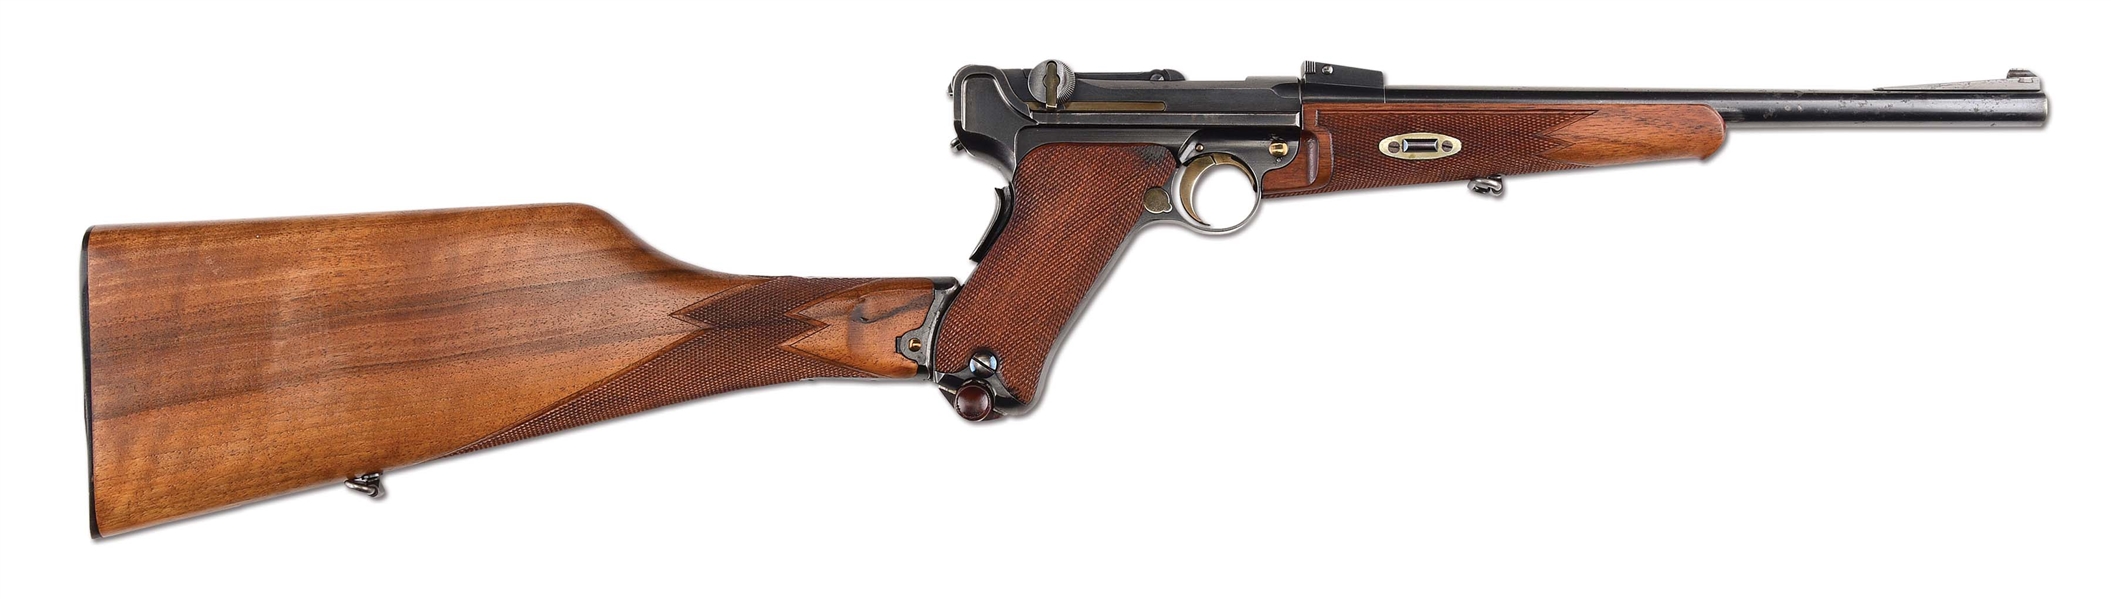 (C) CASED DWM MODEL 1902 LUGER SEMI AUTOMATIC CARBINE RETAILER MARKED FOR BUENOS AIRES.